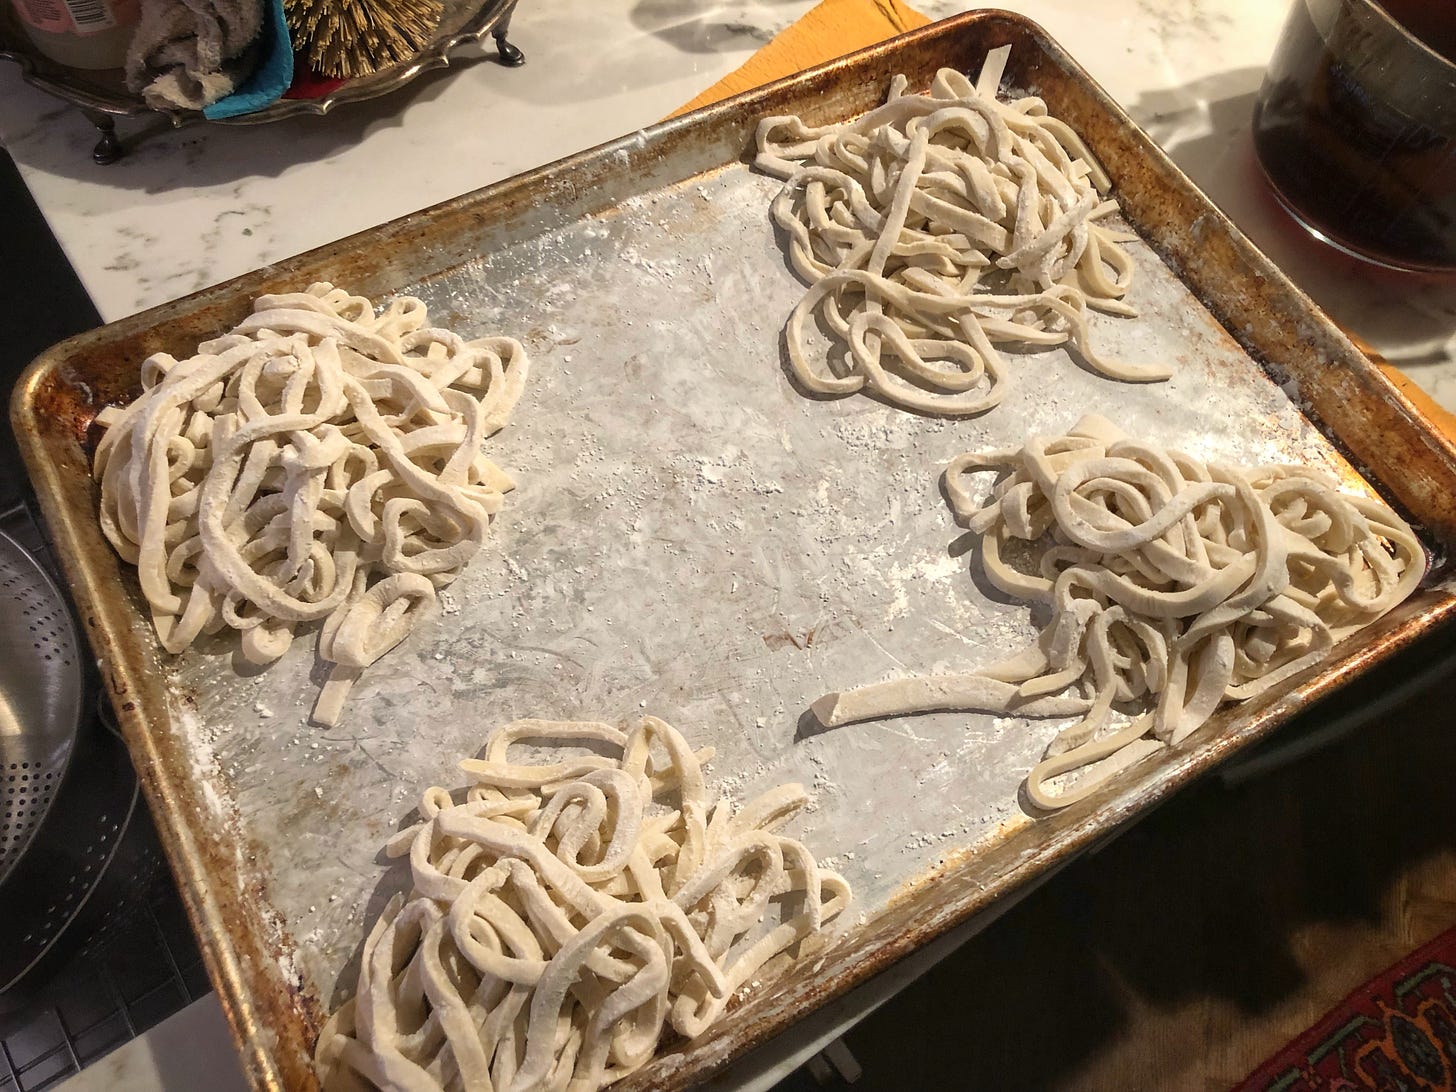 A metal sheet tray with four nests of noodles heavily dusted in corn starch